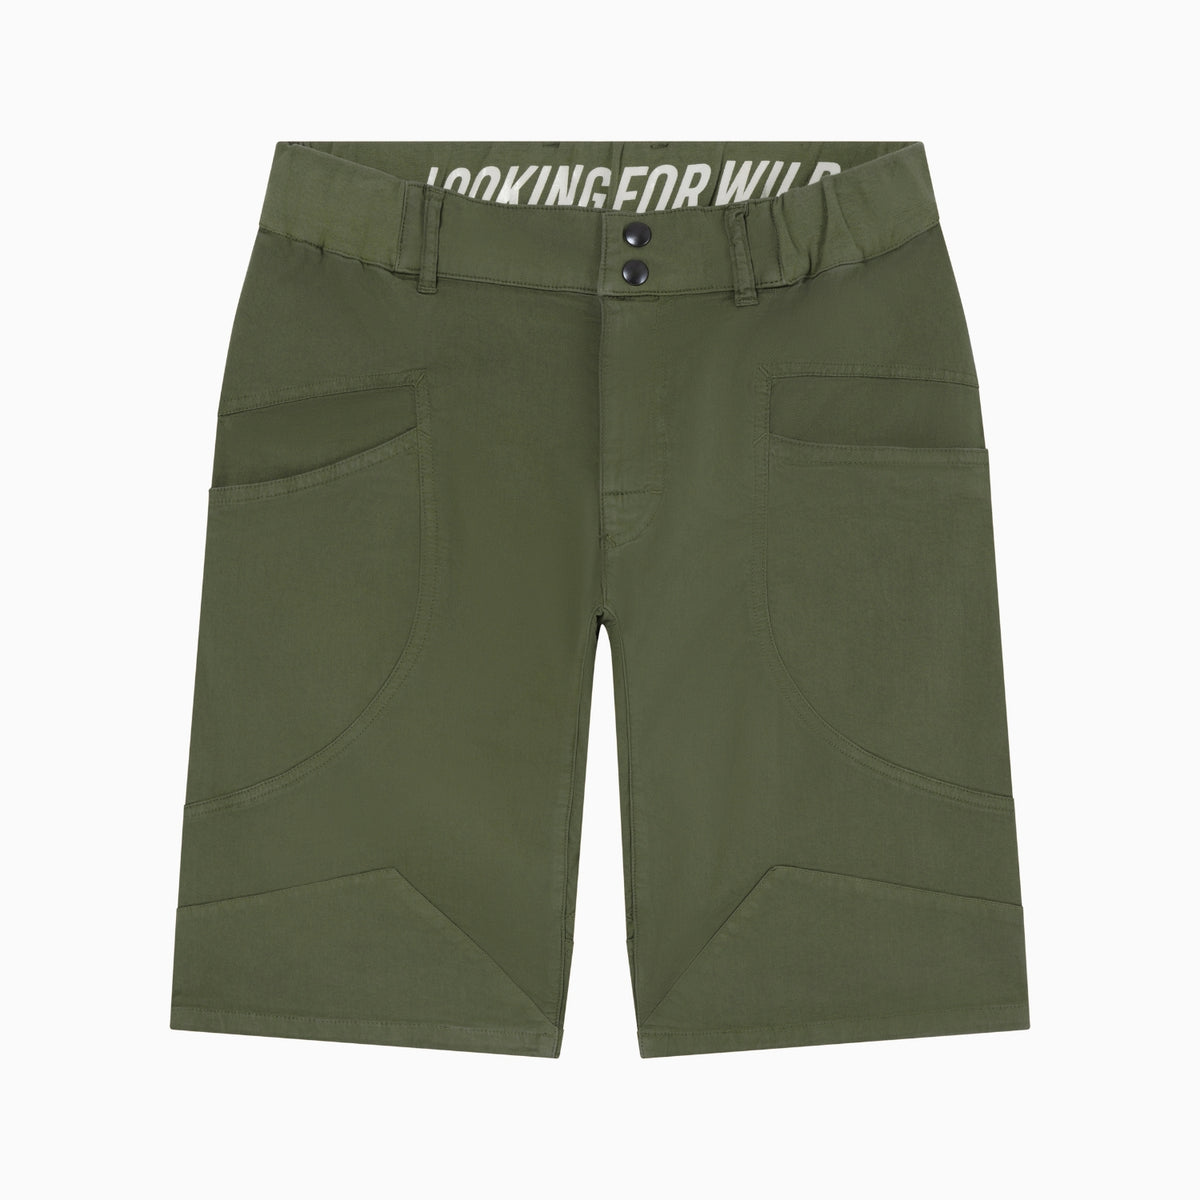 Looking For Wild Cilaos Shorts - Mens (Olive)